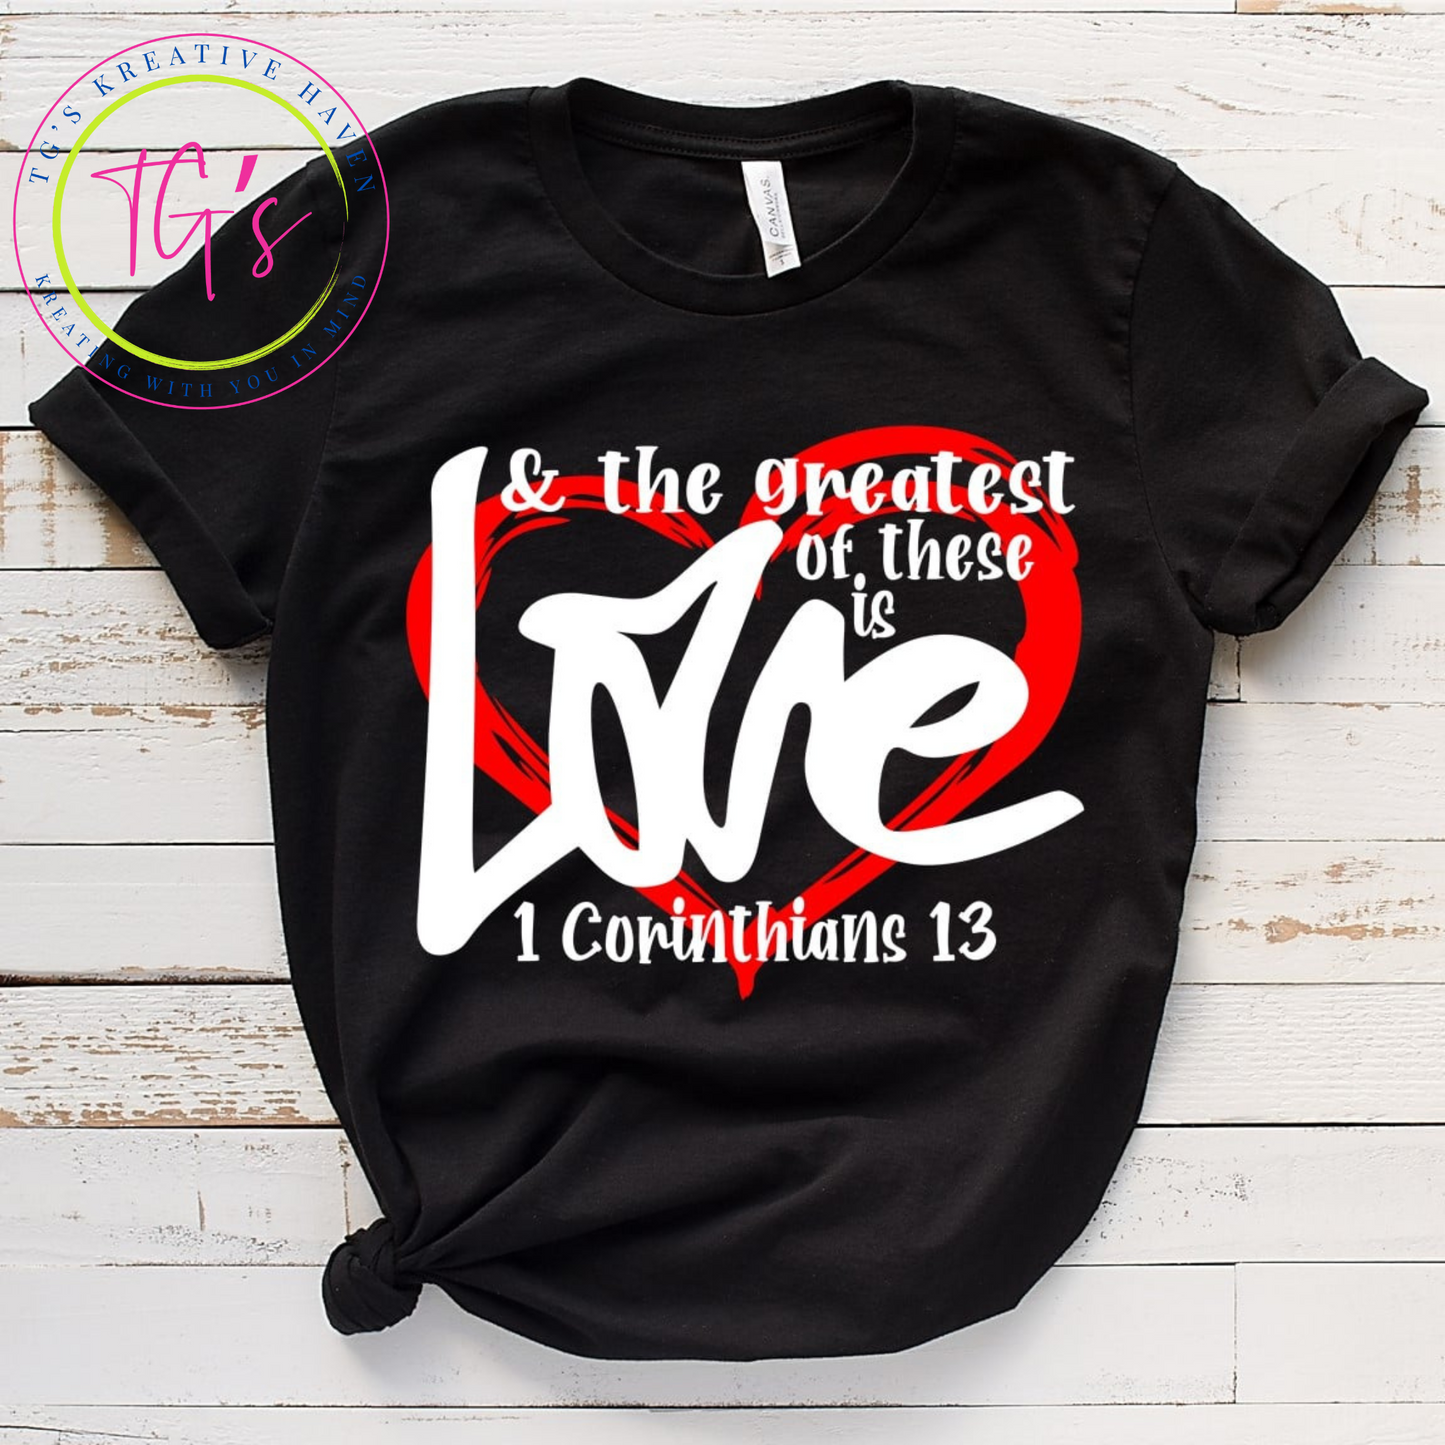 And The Greatest of These Is Love Tee